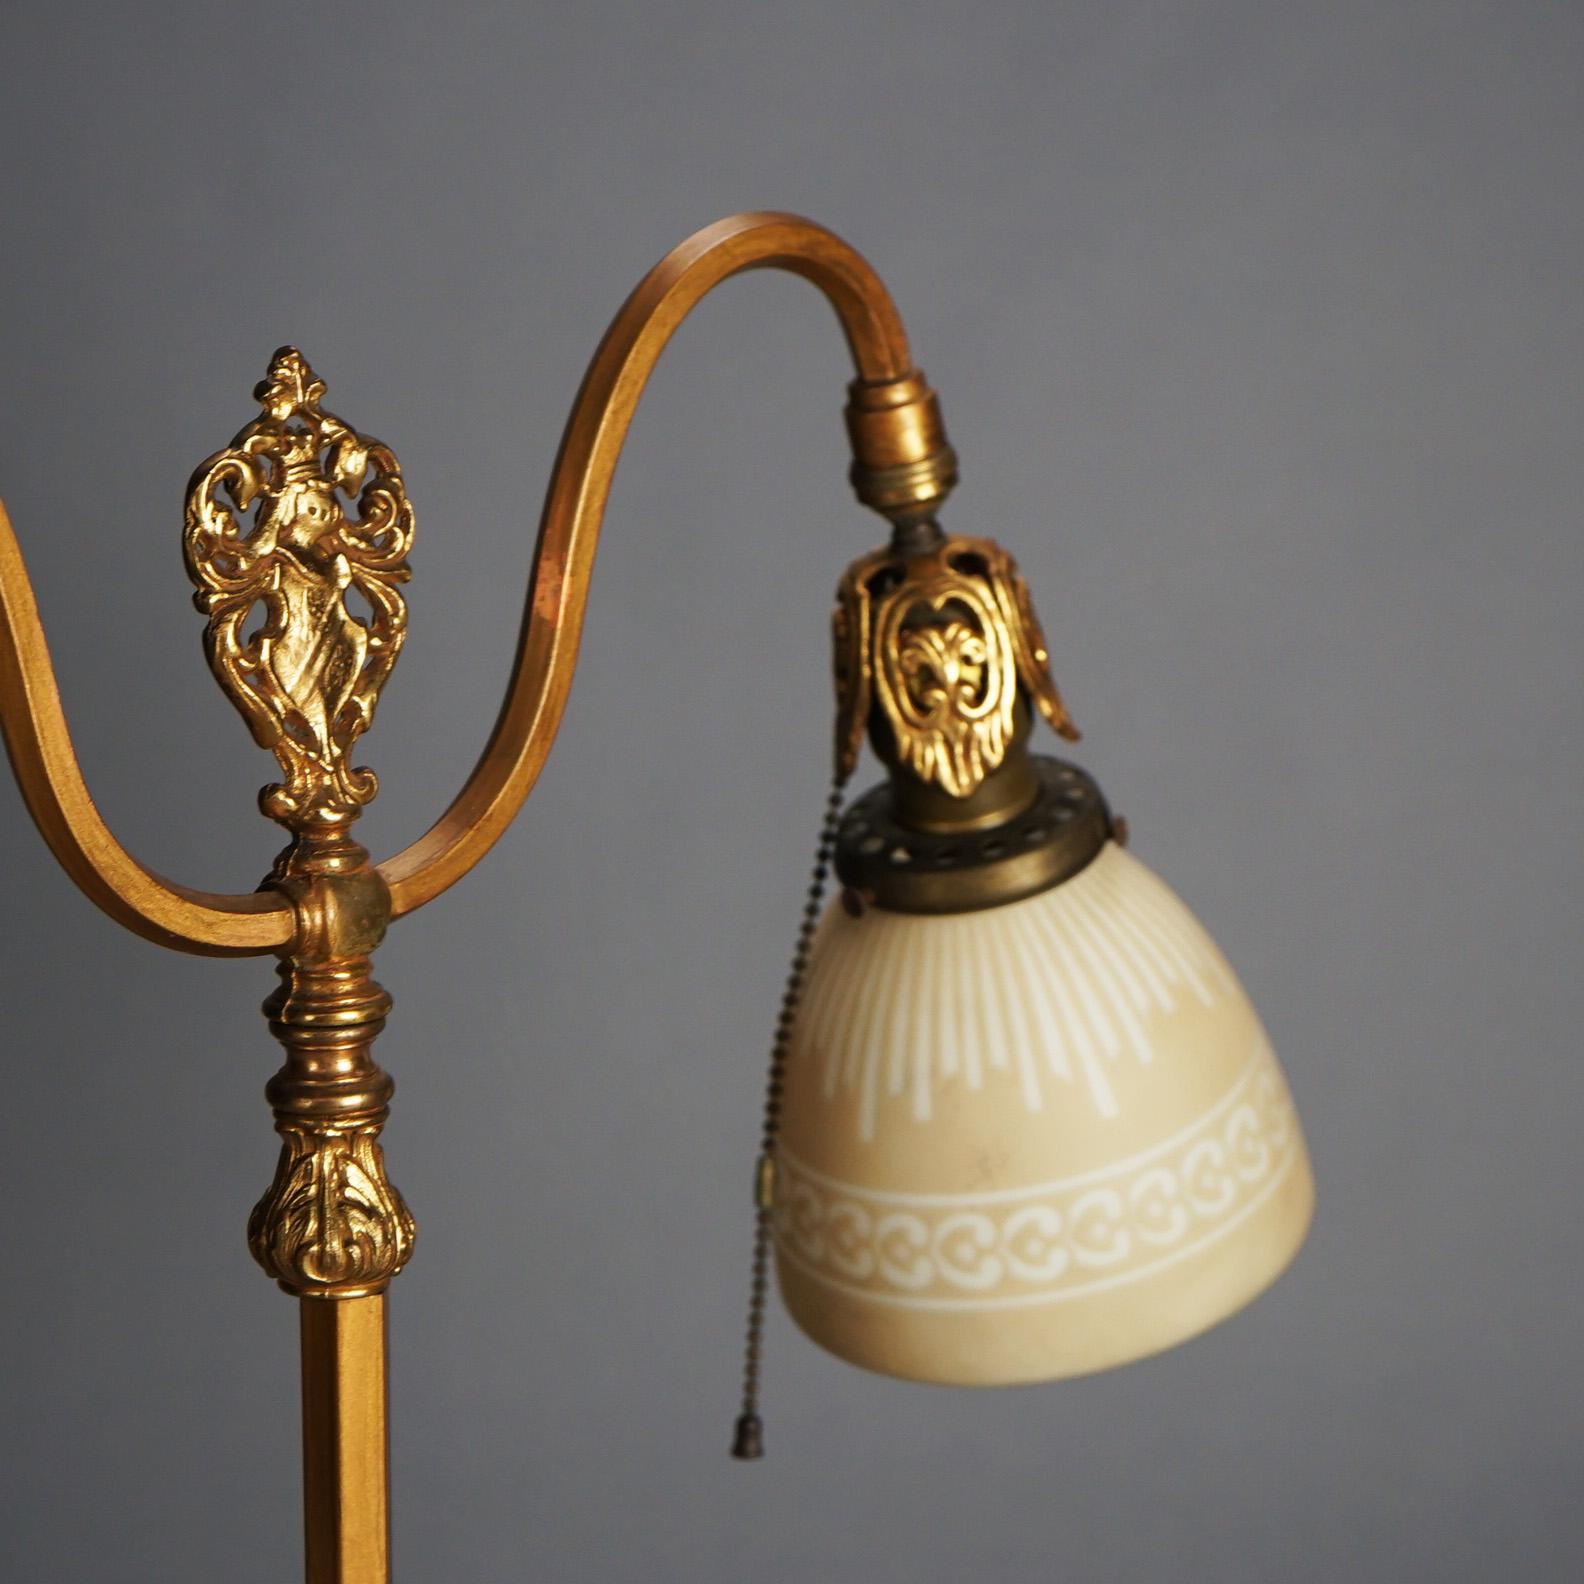 Antique Rembrandt Two-Light Foliate Embossed Brass Table Lamp Circa 1920 For Sale 4